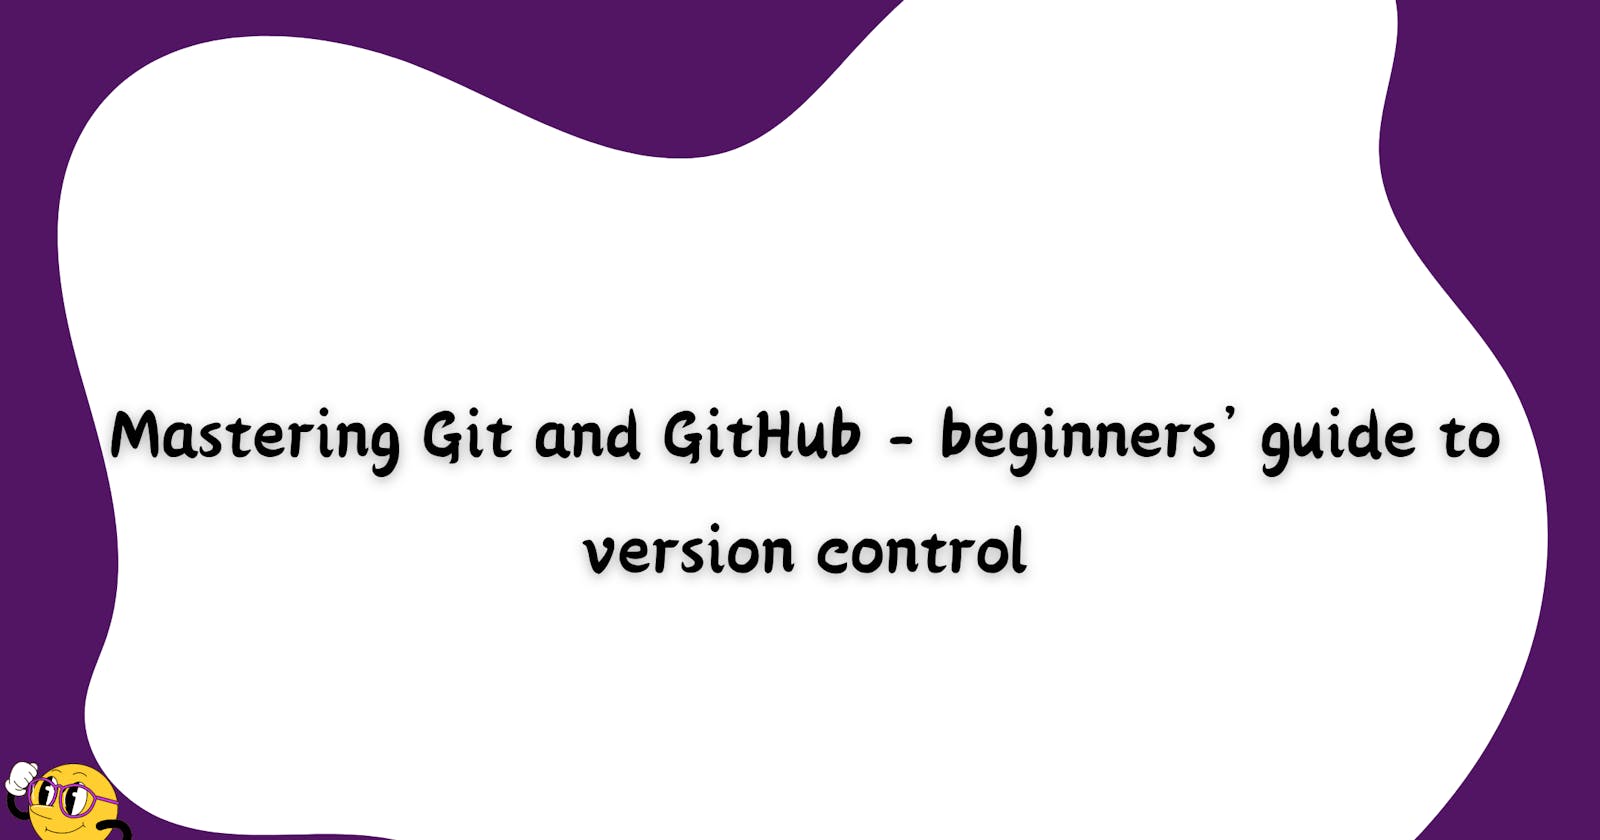 Mastering Git and GitHub - Beginners' Guide to Version Control